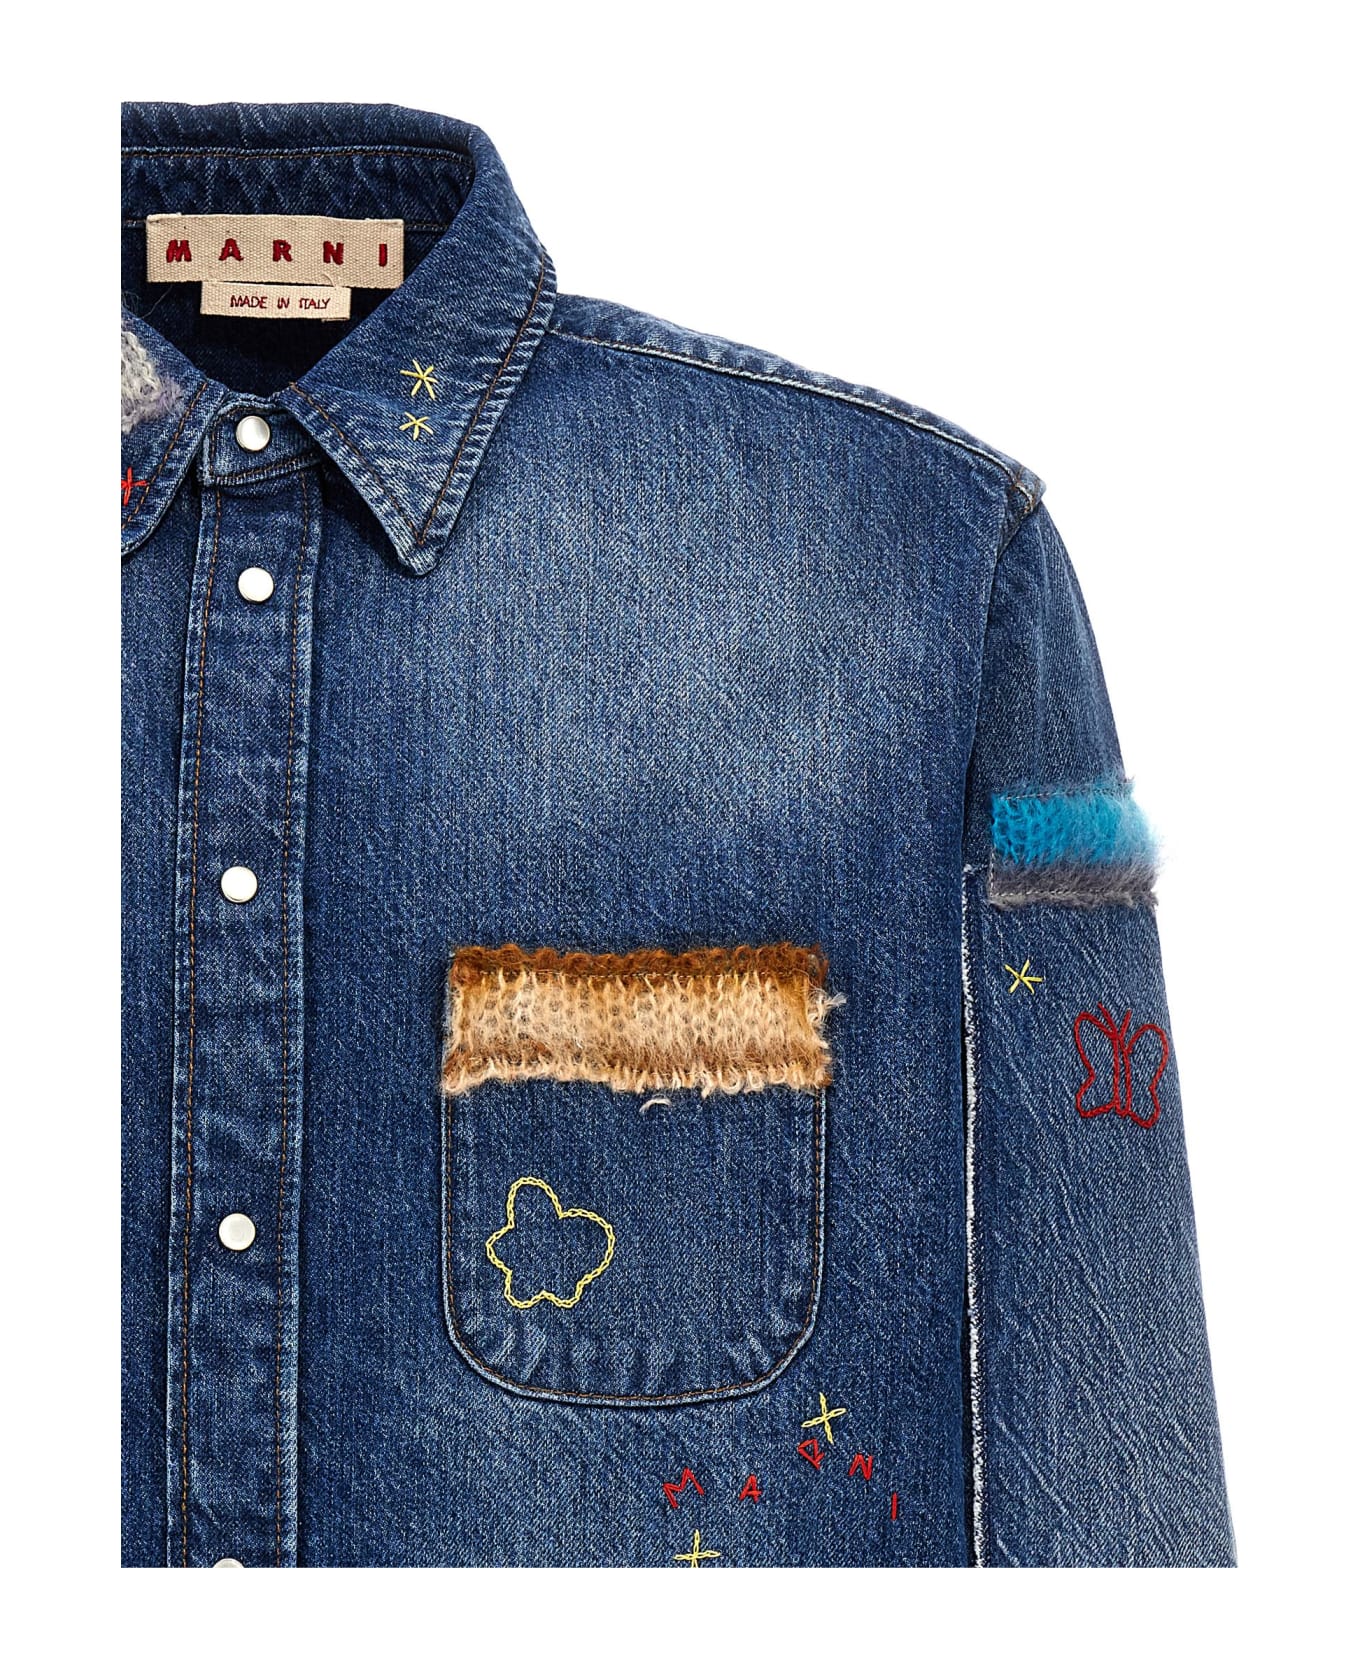 Marni Denim Shirt, Embroidery And Patches - BLUE/MULTICOLOUR シャツ